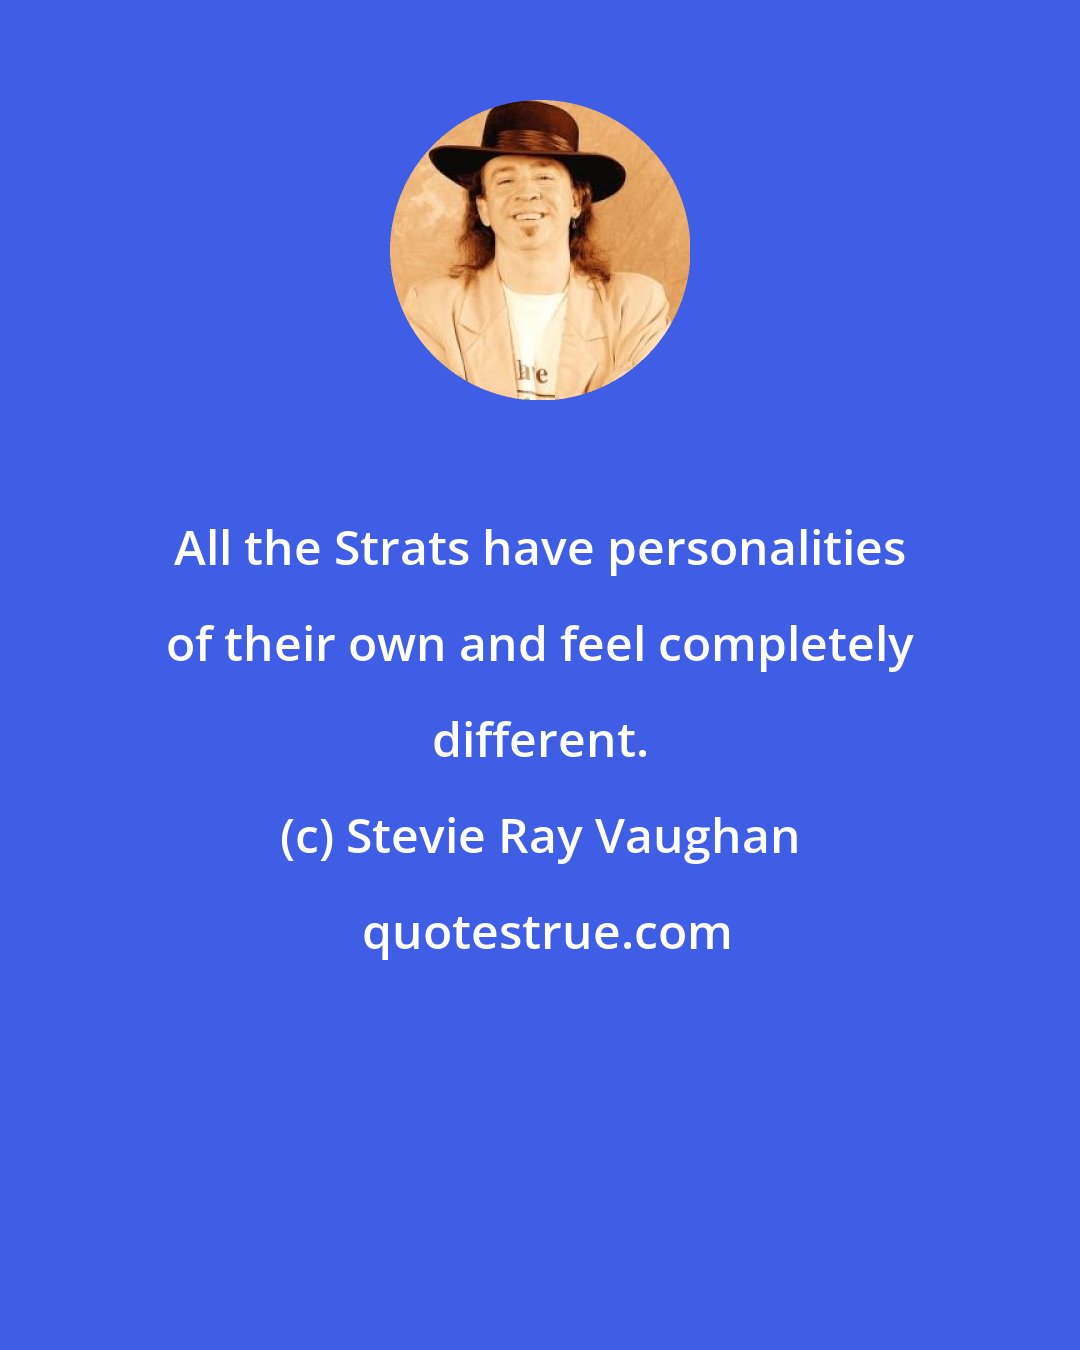 Stevie Ray Vaughan: All the Strats have personalities of their own and feel completely different.